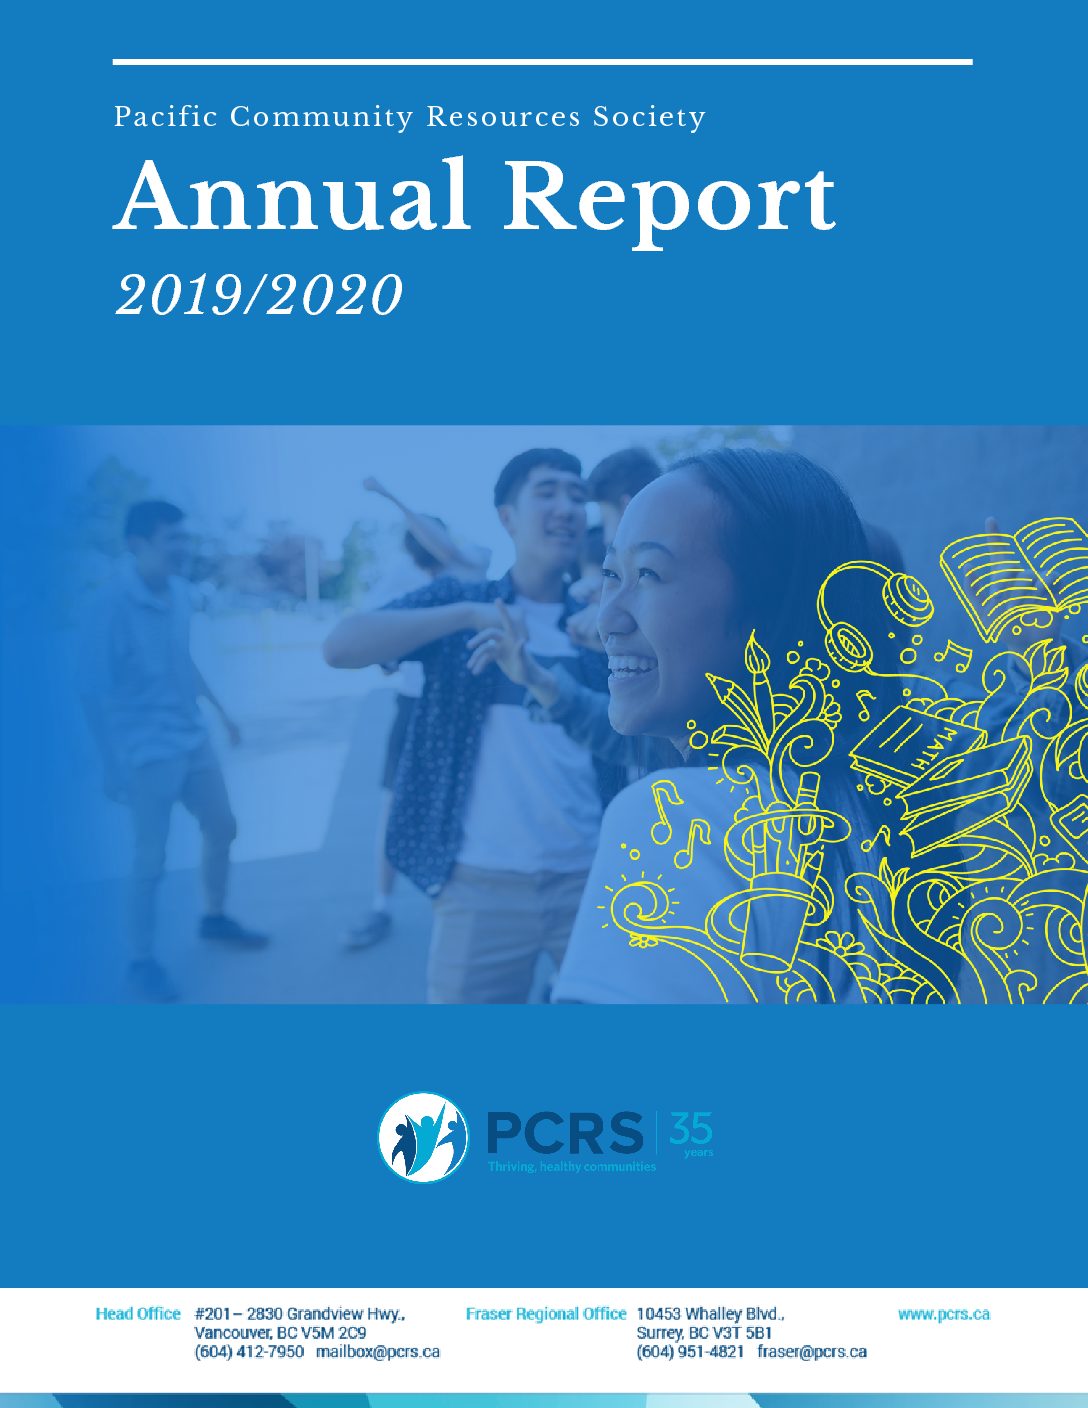 PCRS - Annual Report - 2020 | Pacific Community Resources Society